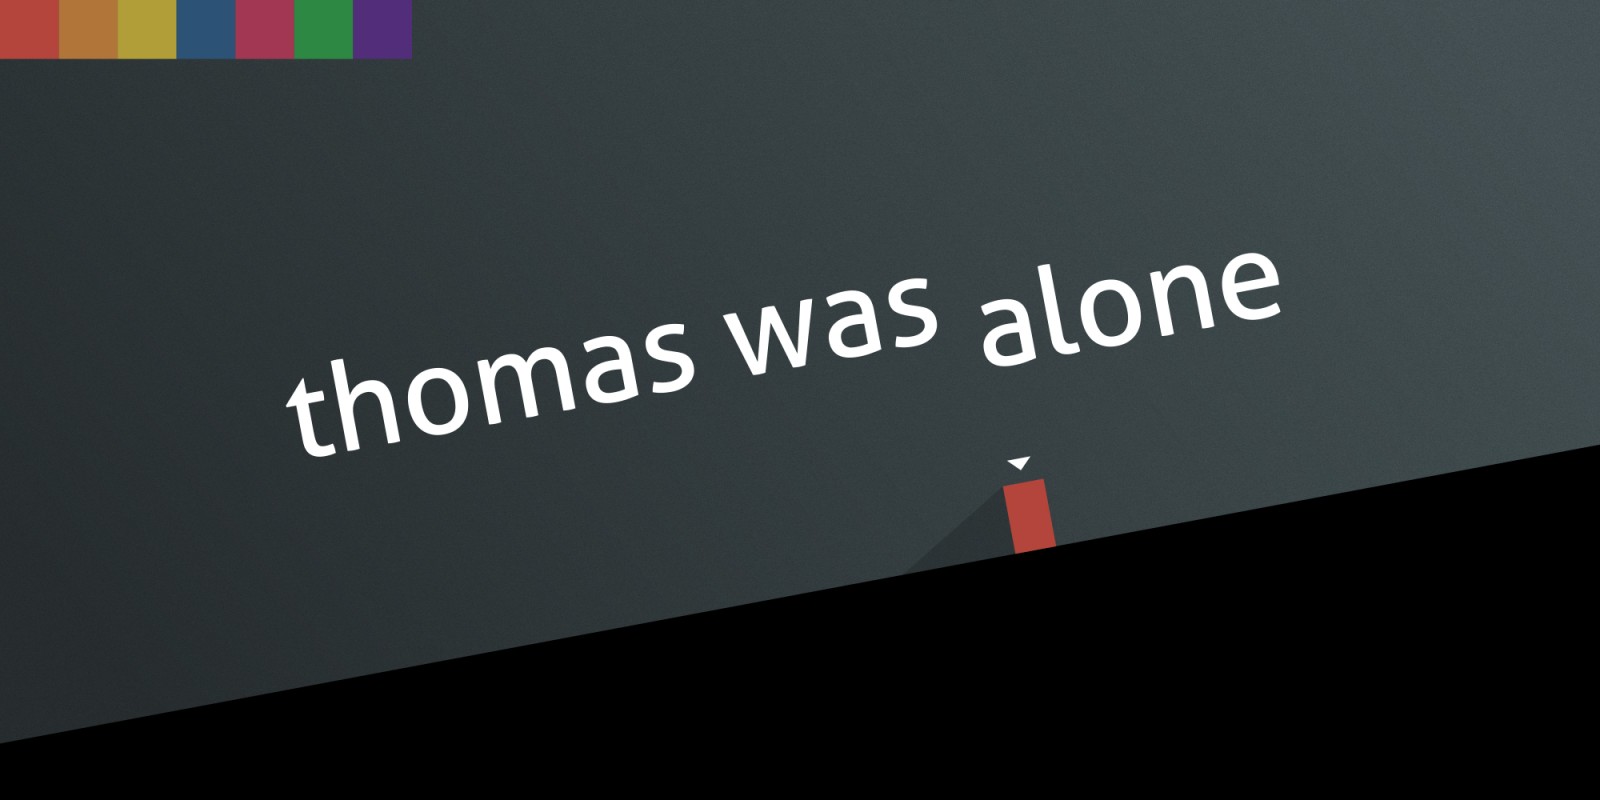 thomas was alone steam download free